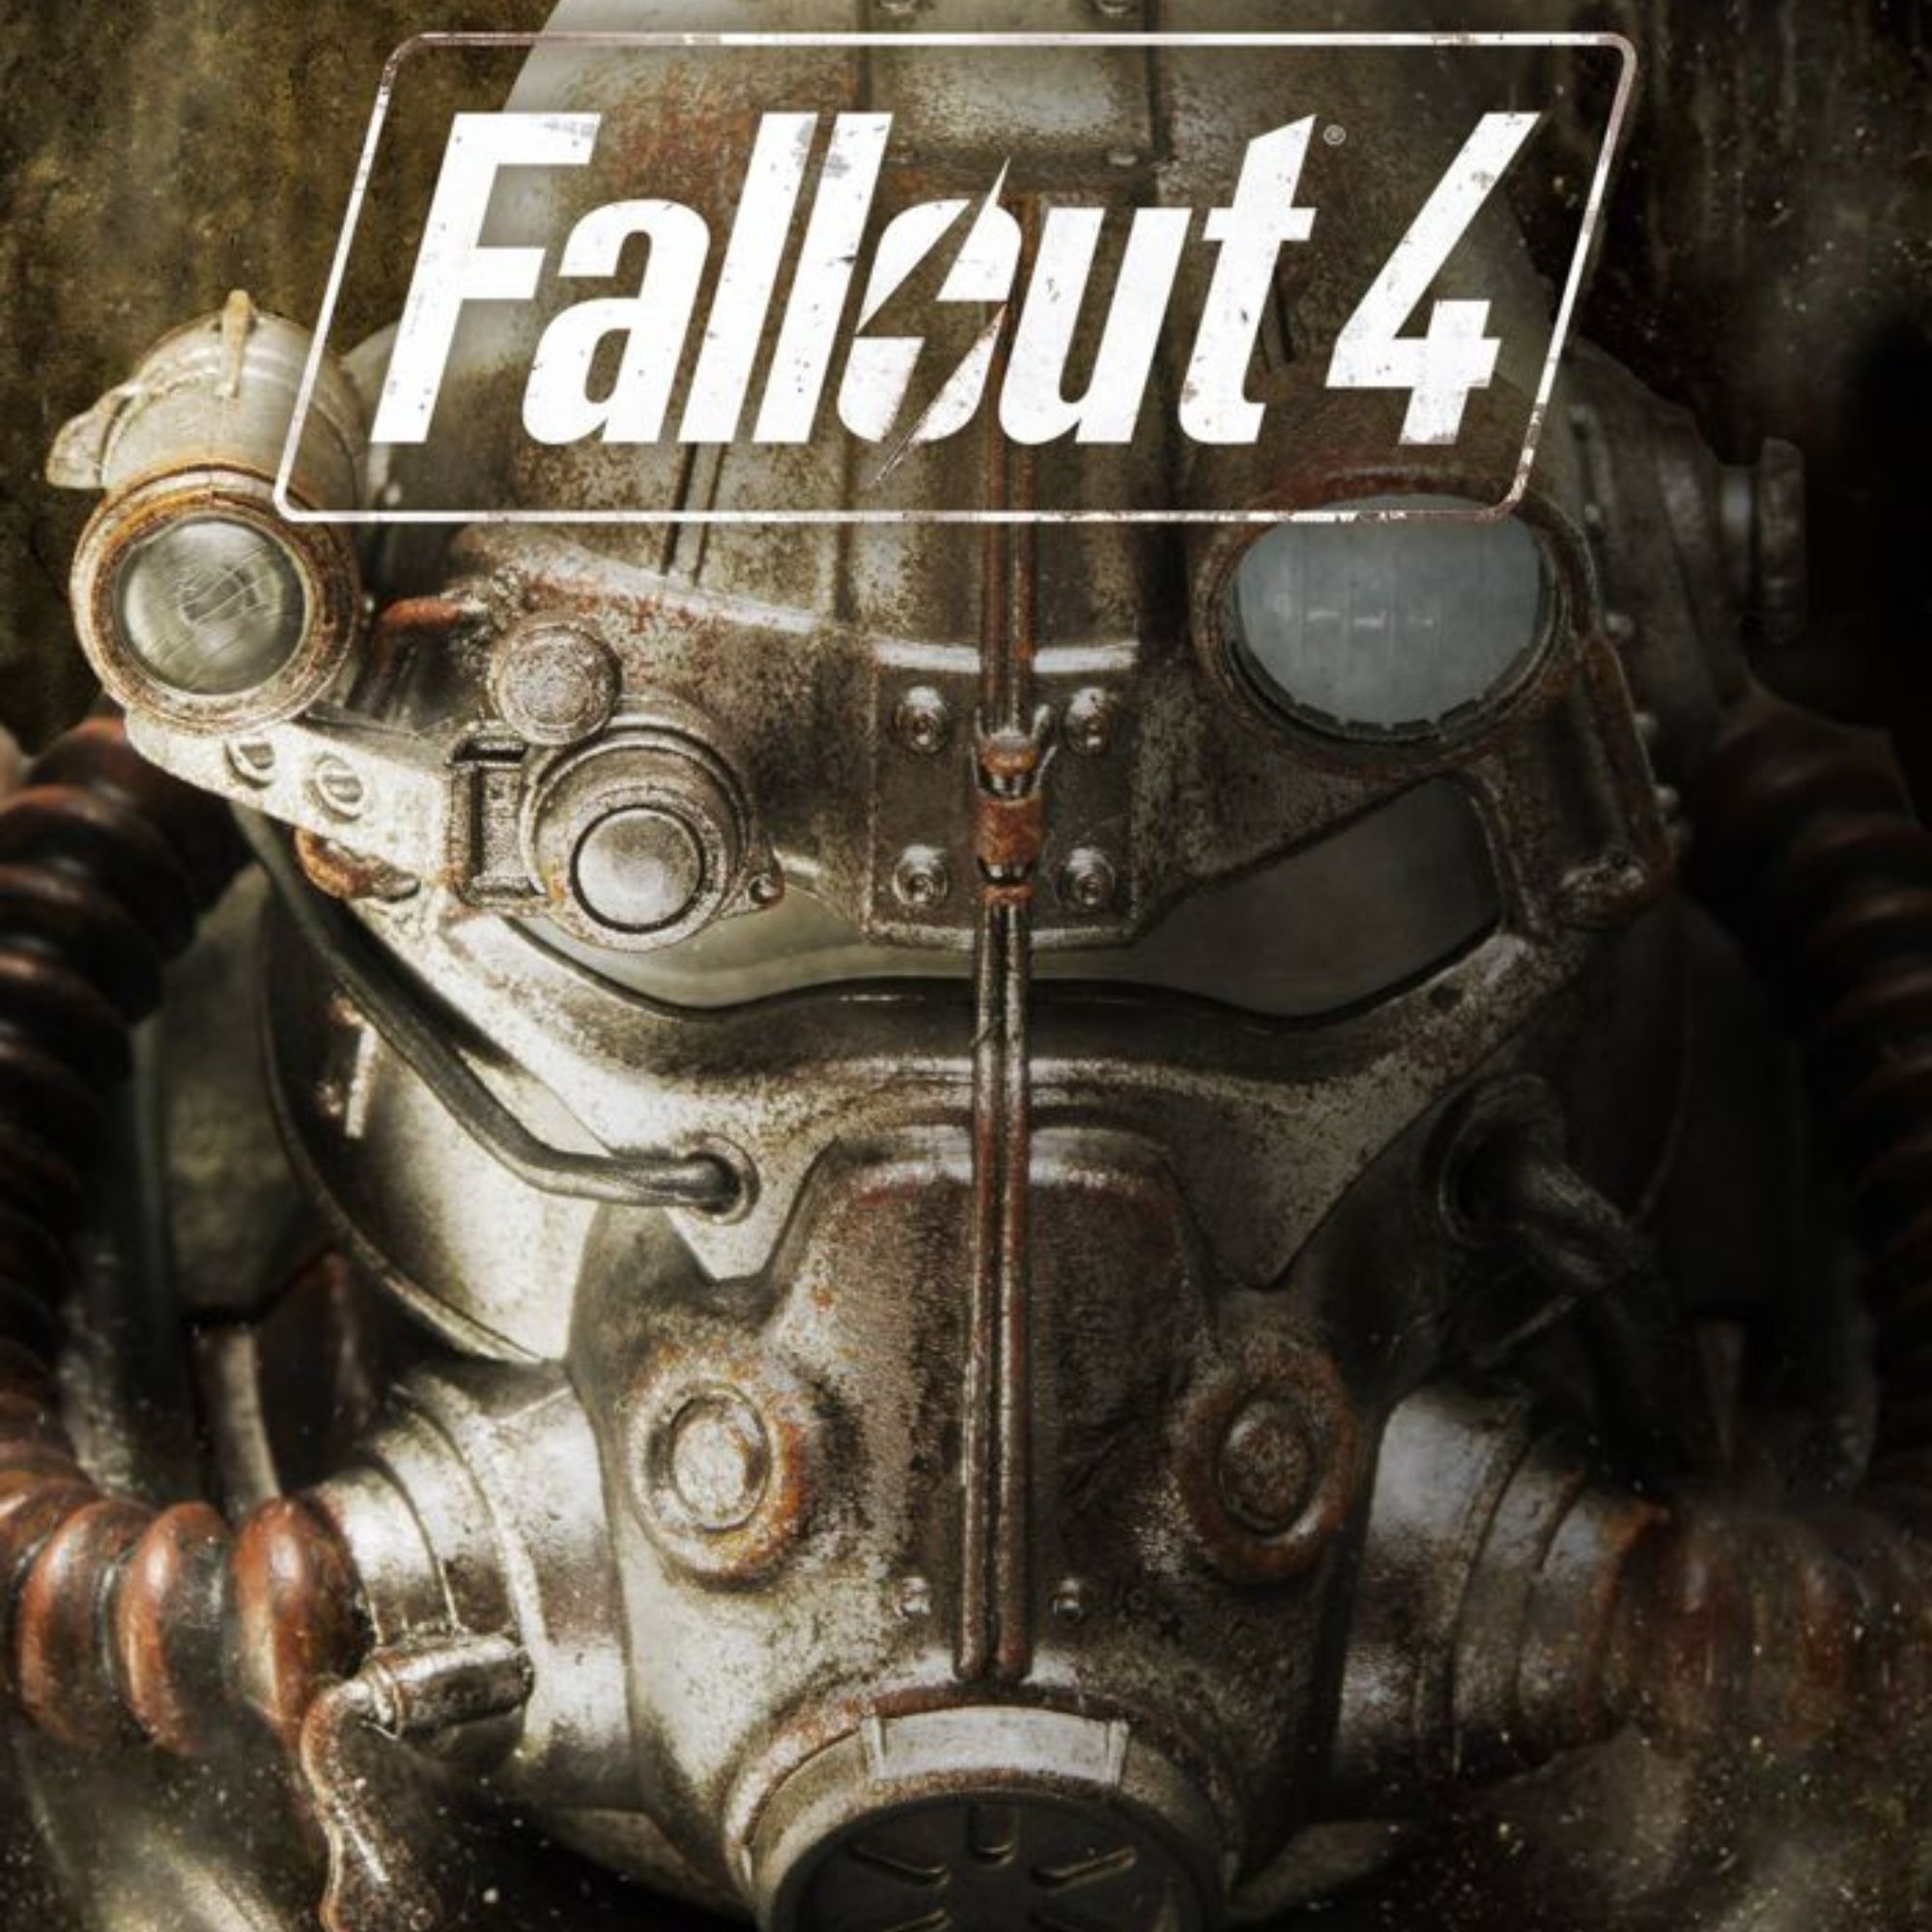 2000x2000 tag image for Fallout 4 showing the power armor helmet and the game's logo